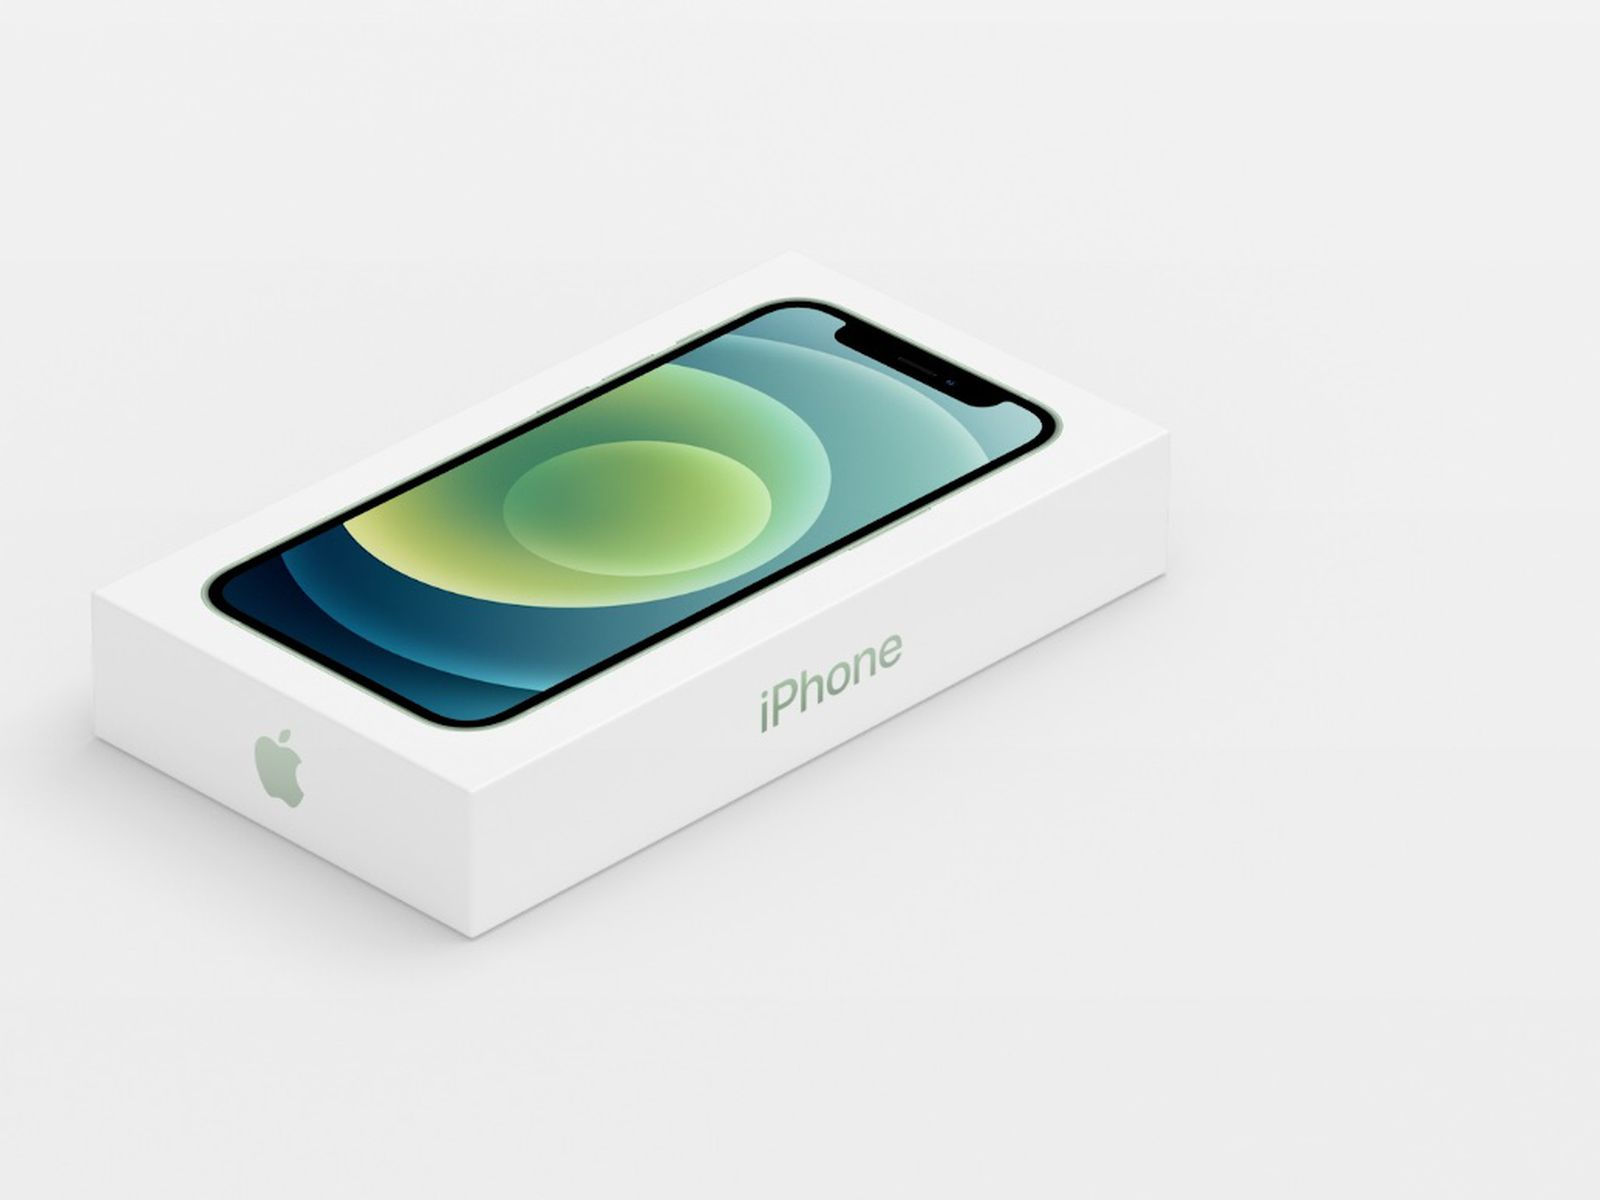  Apple Earned $ 6.5 Billion By Removing Chargers From iPhone Boxes 